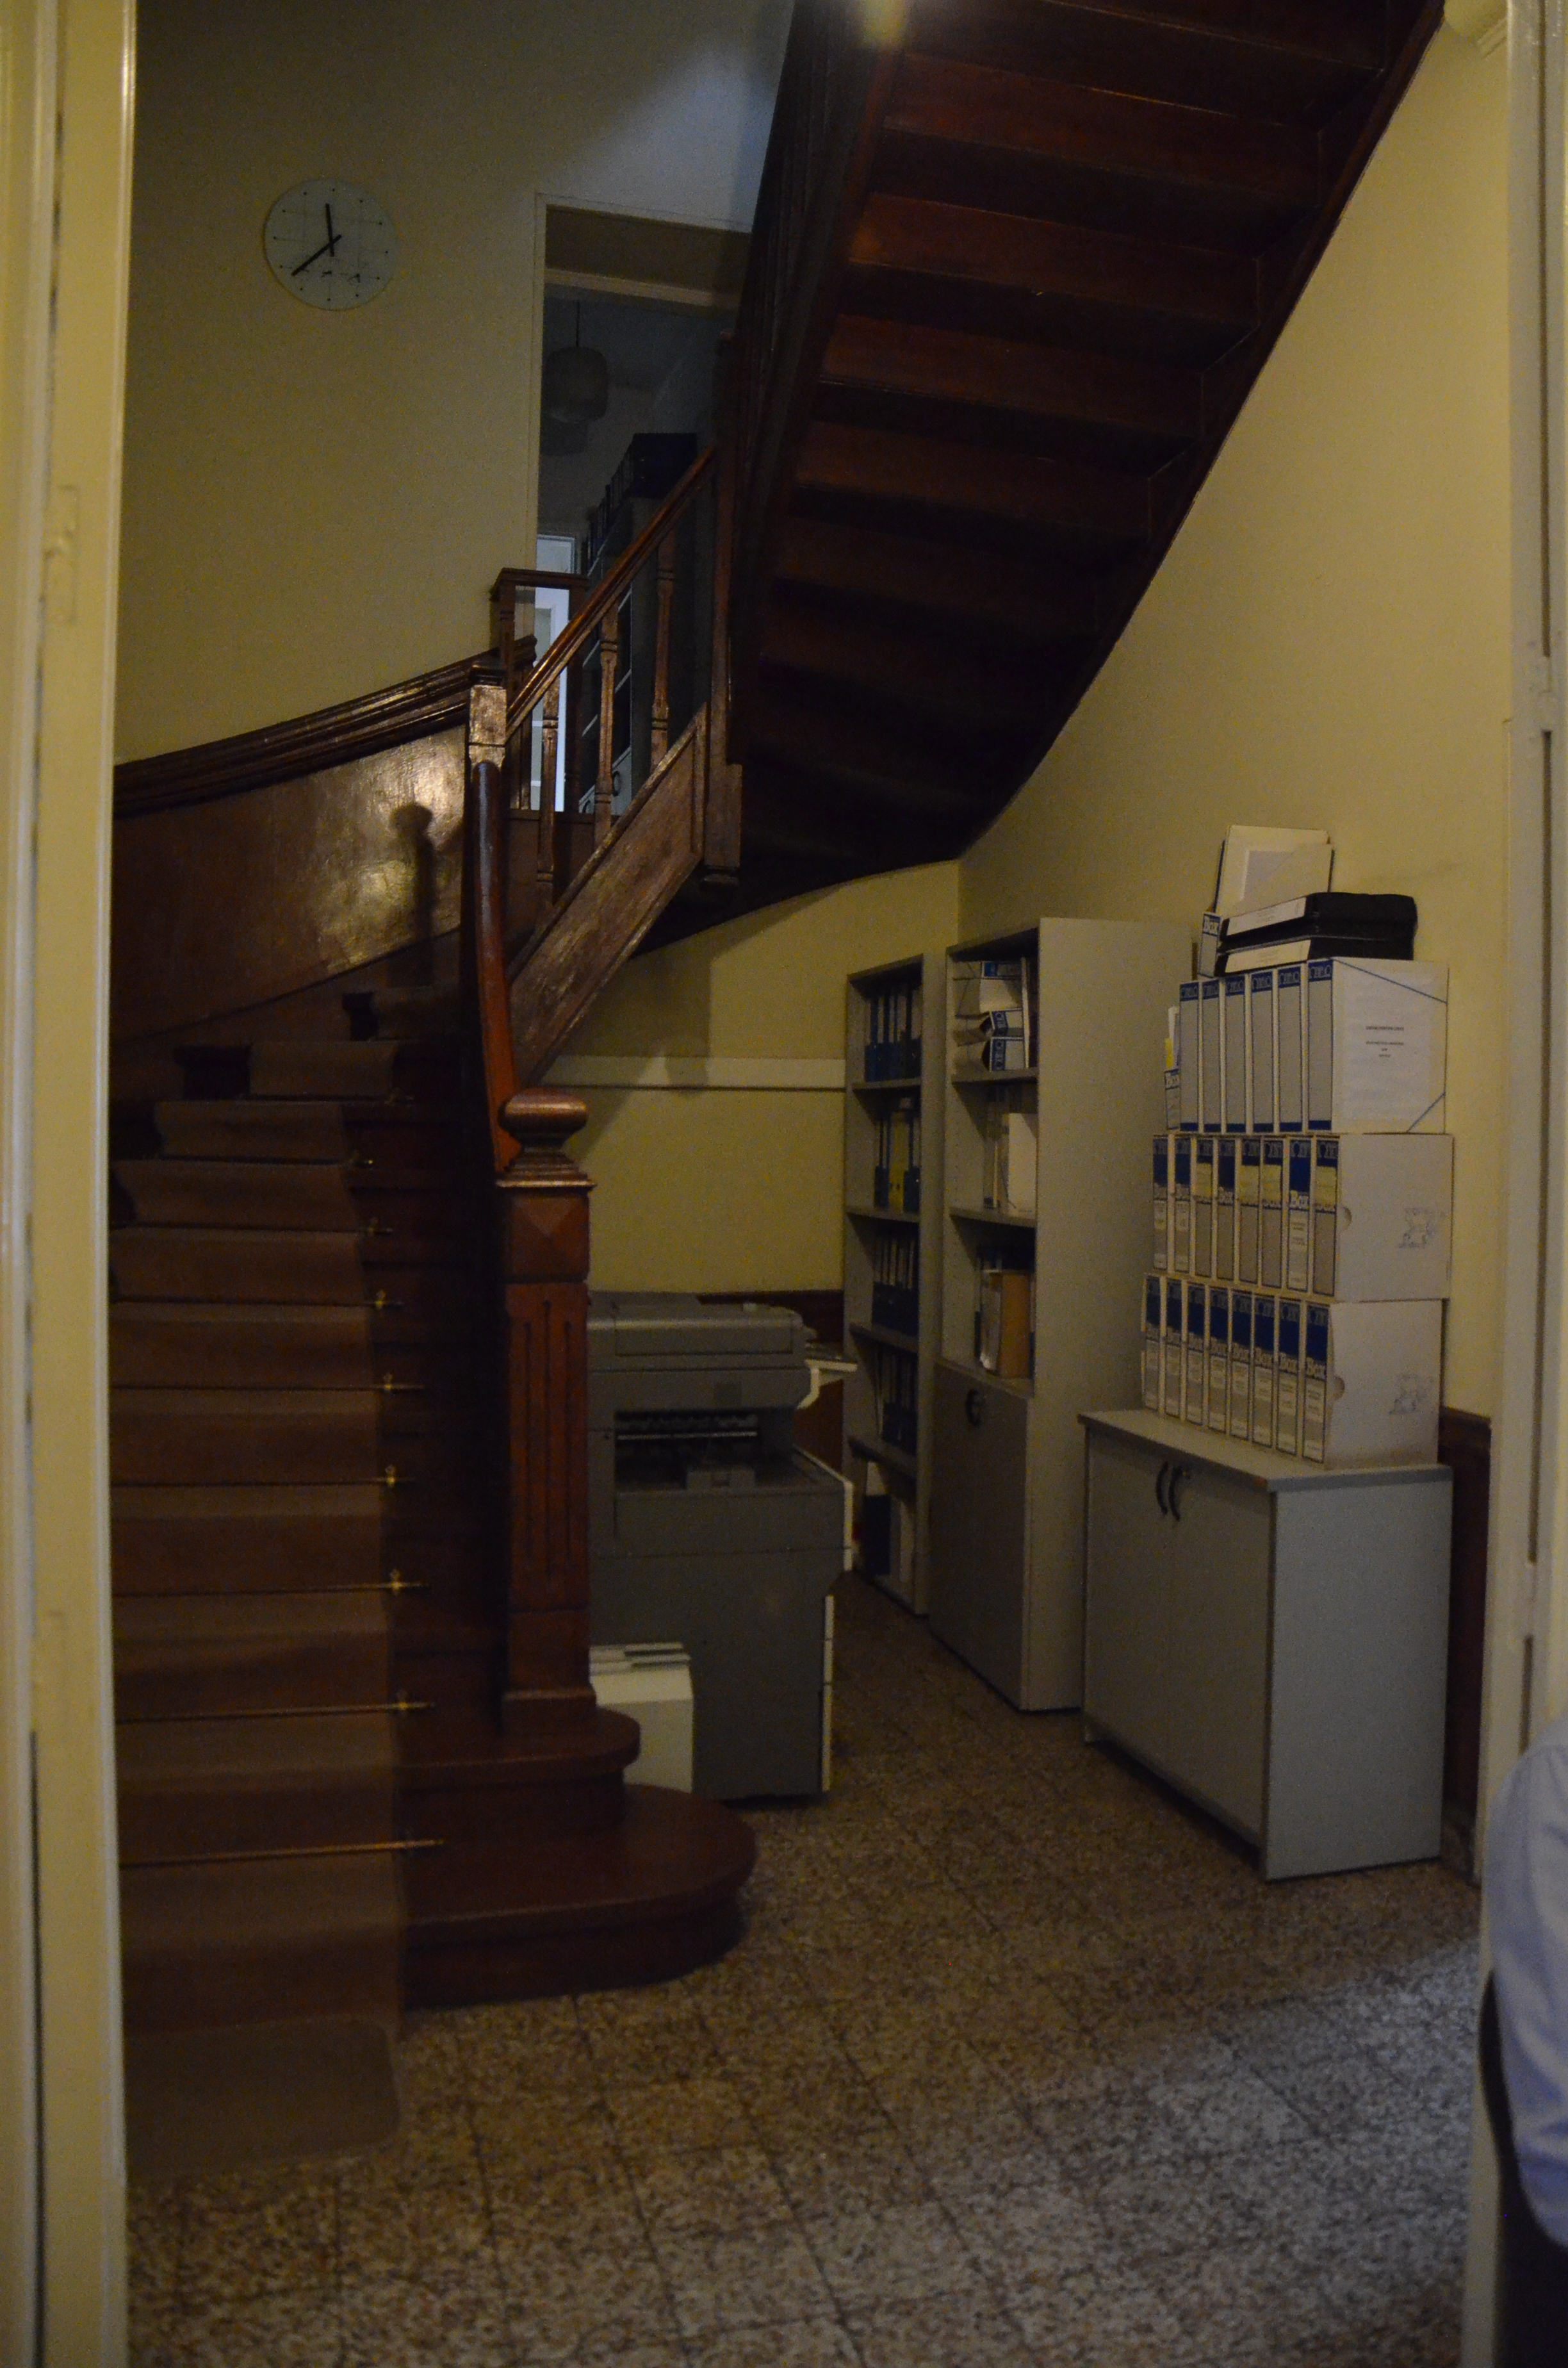 Entrance hall, wooden stairs